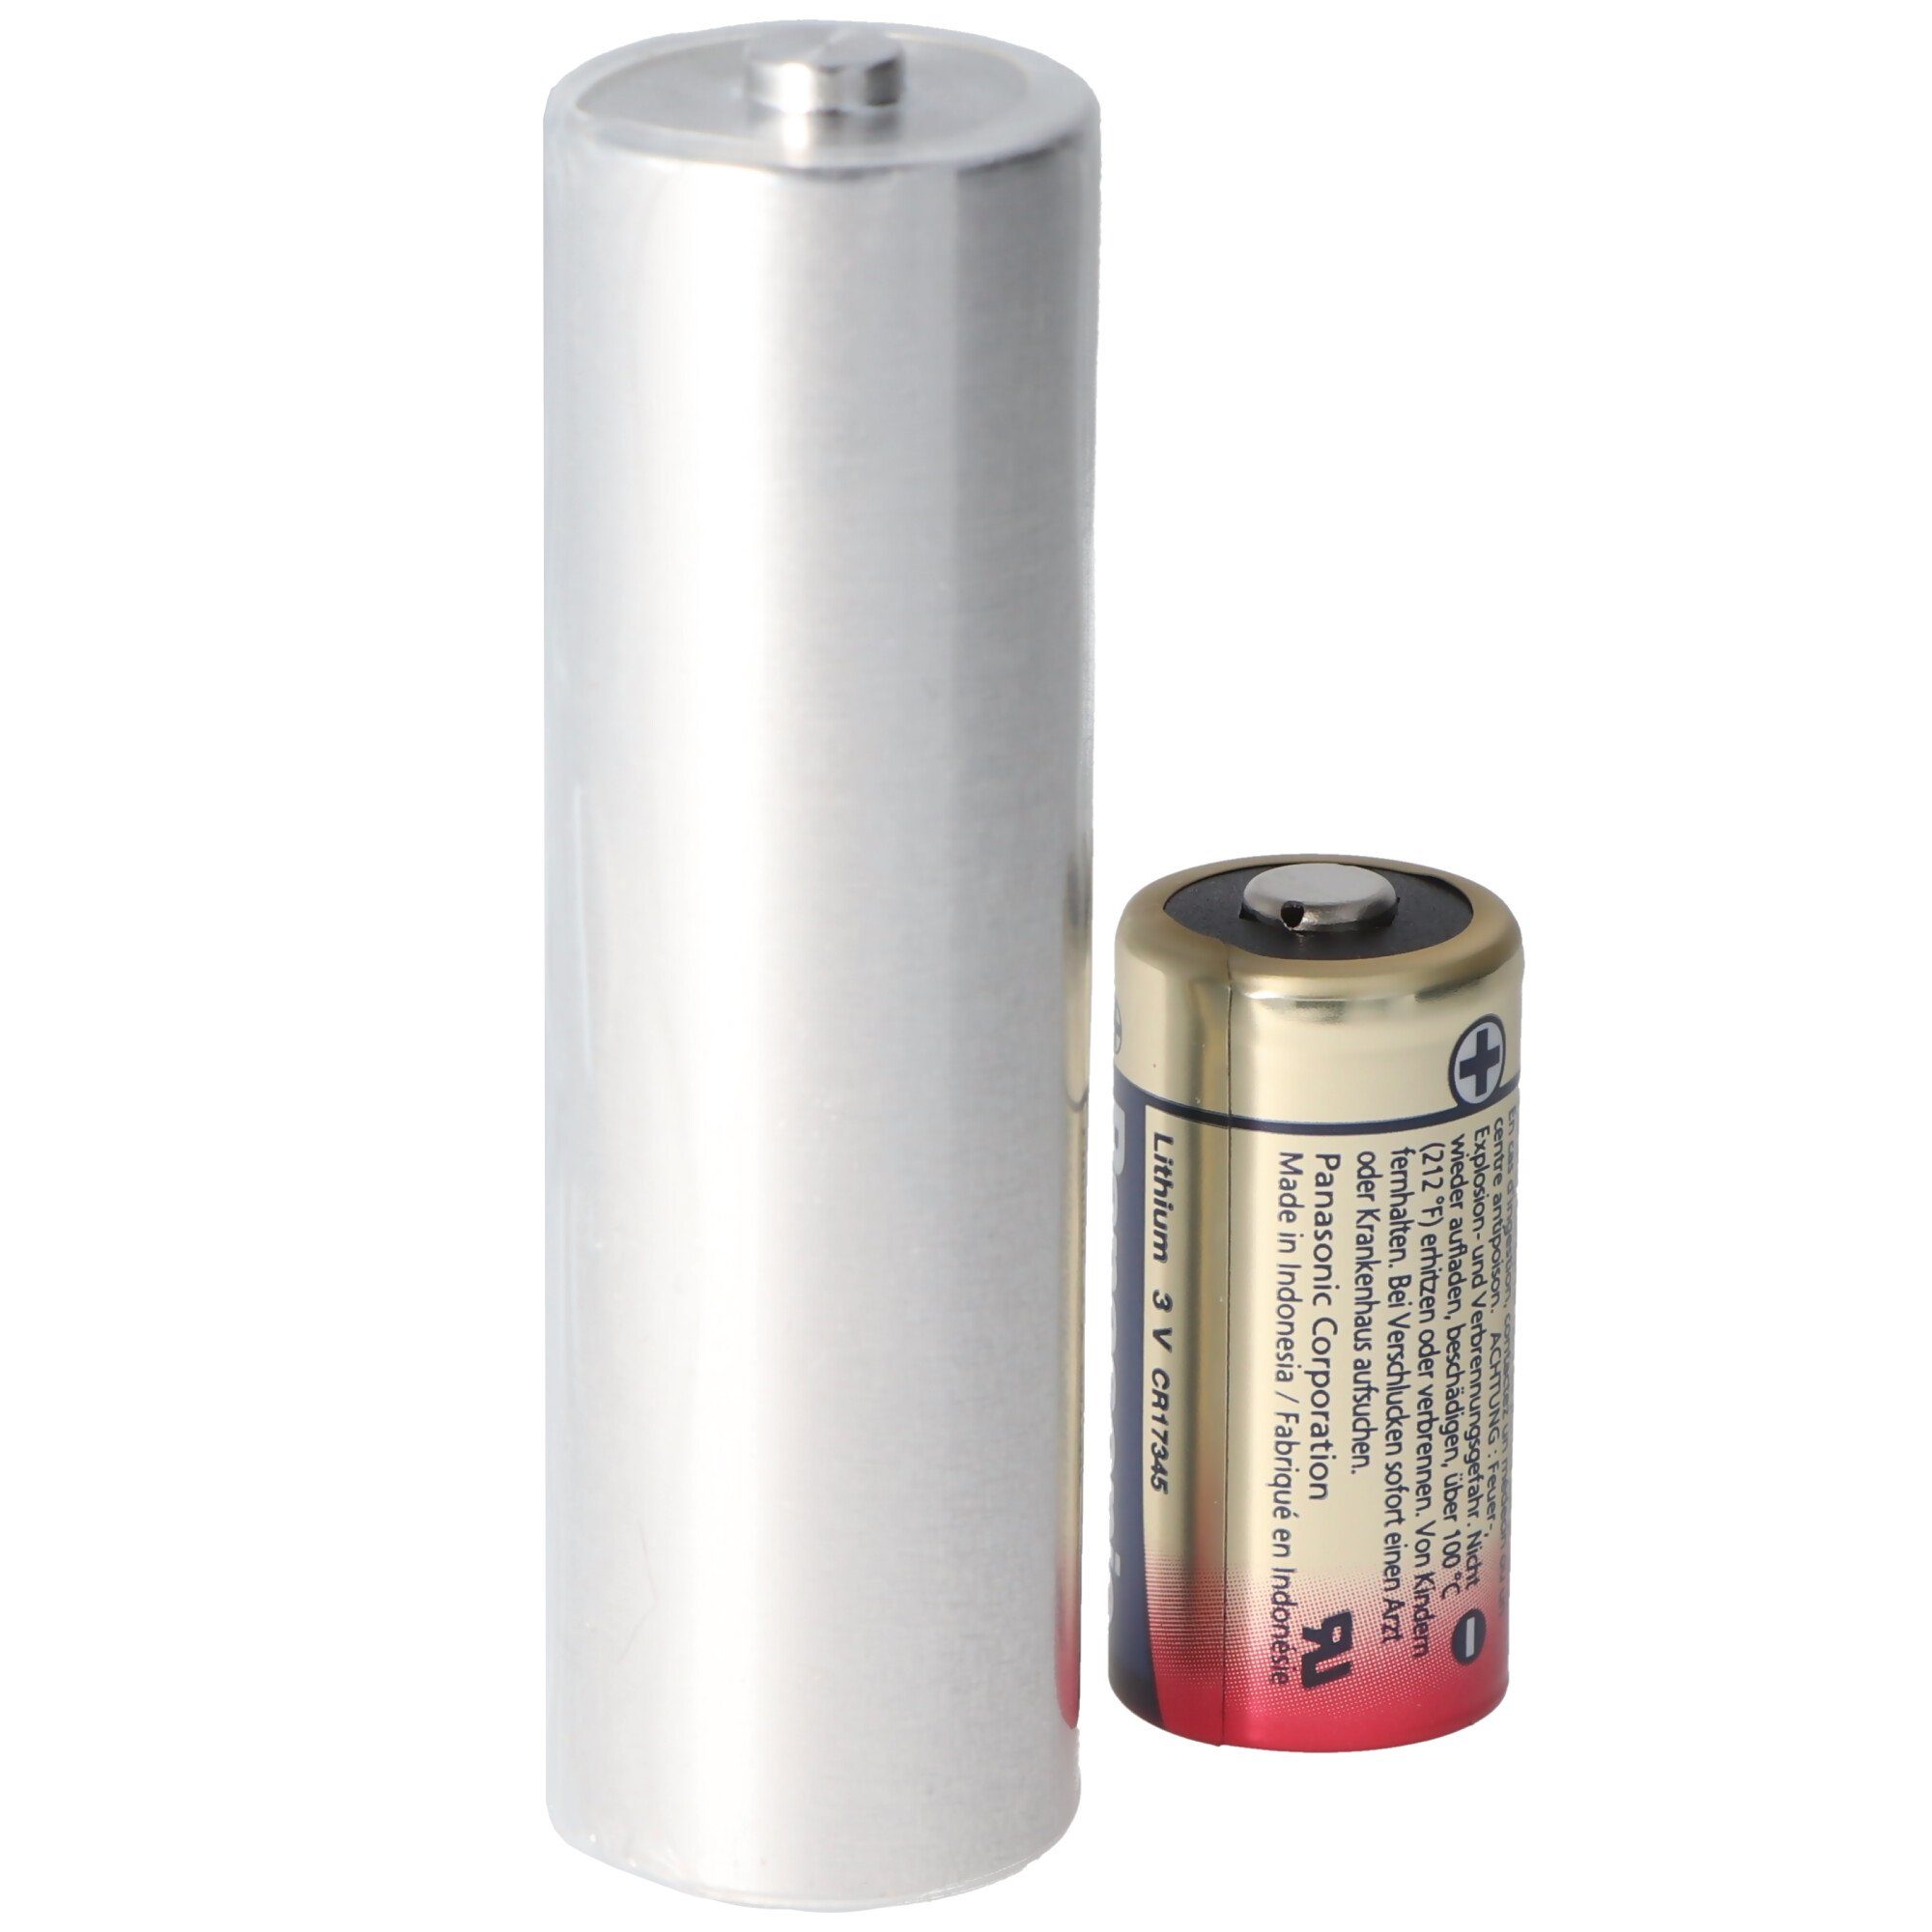 Batterie 3,0 2010, Stab-Batterie, Duplex Batterie AccuCell Adapter Vo 2R10 3010, 2R10R,